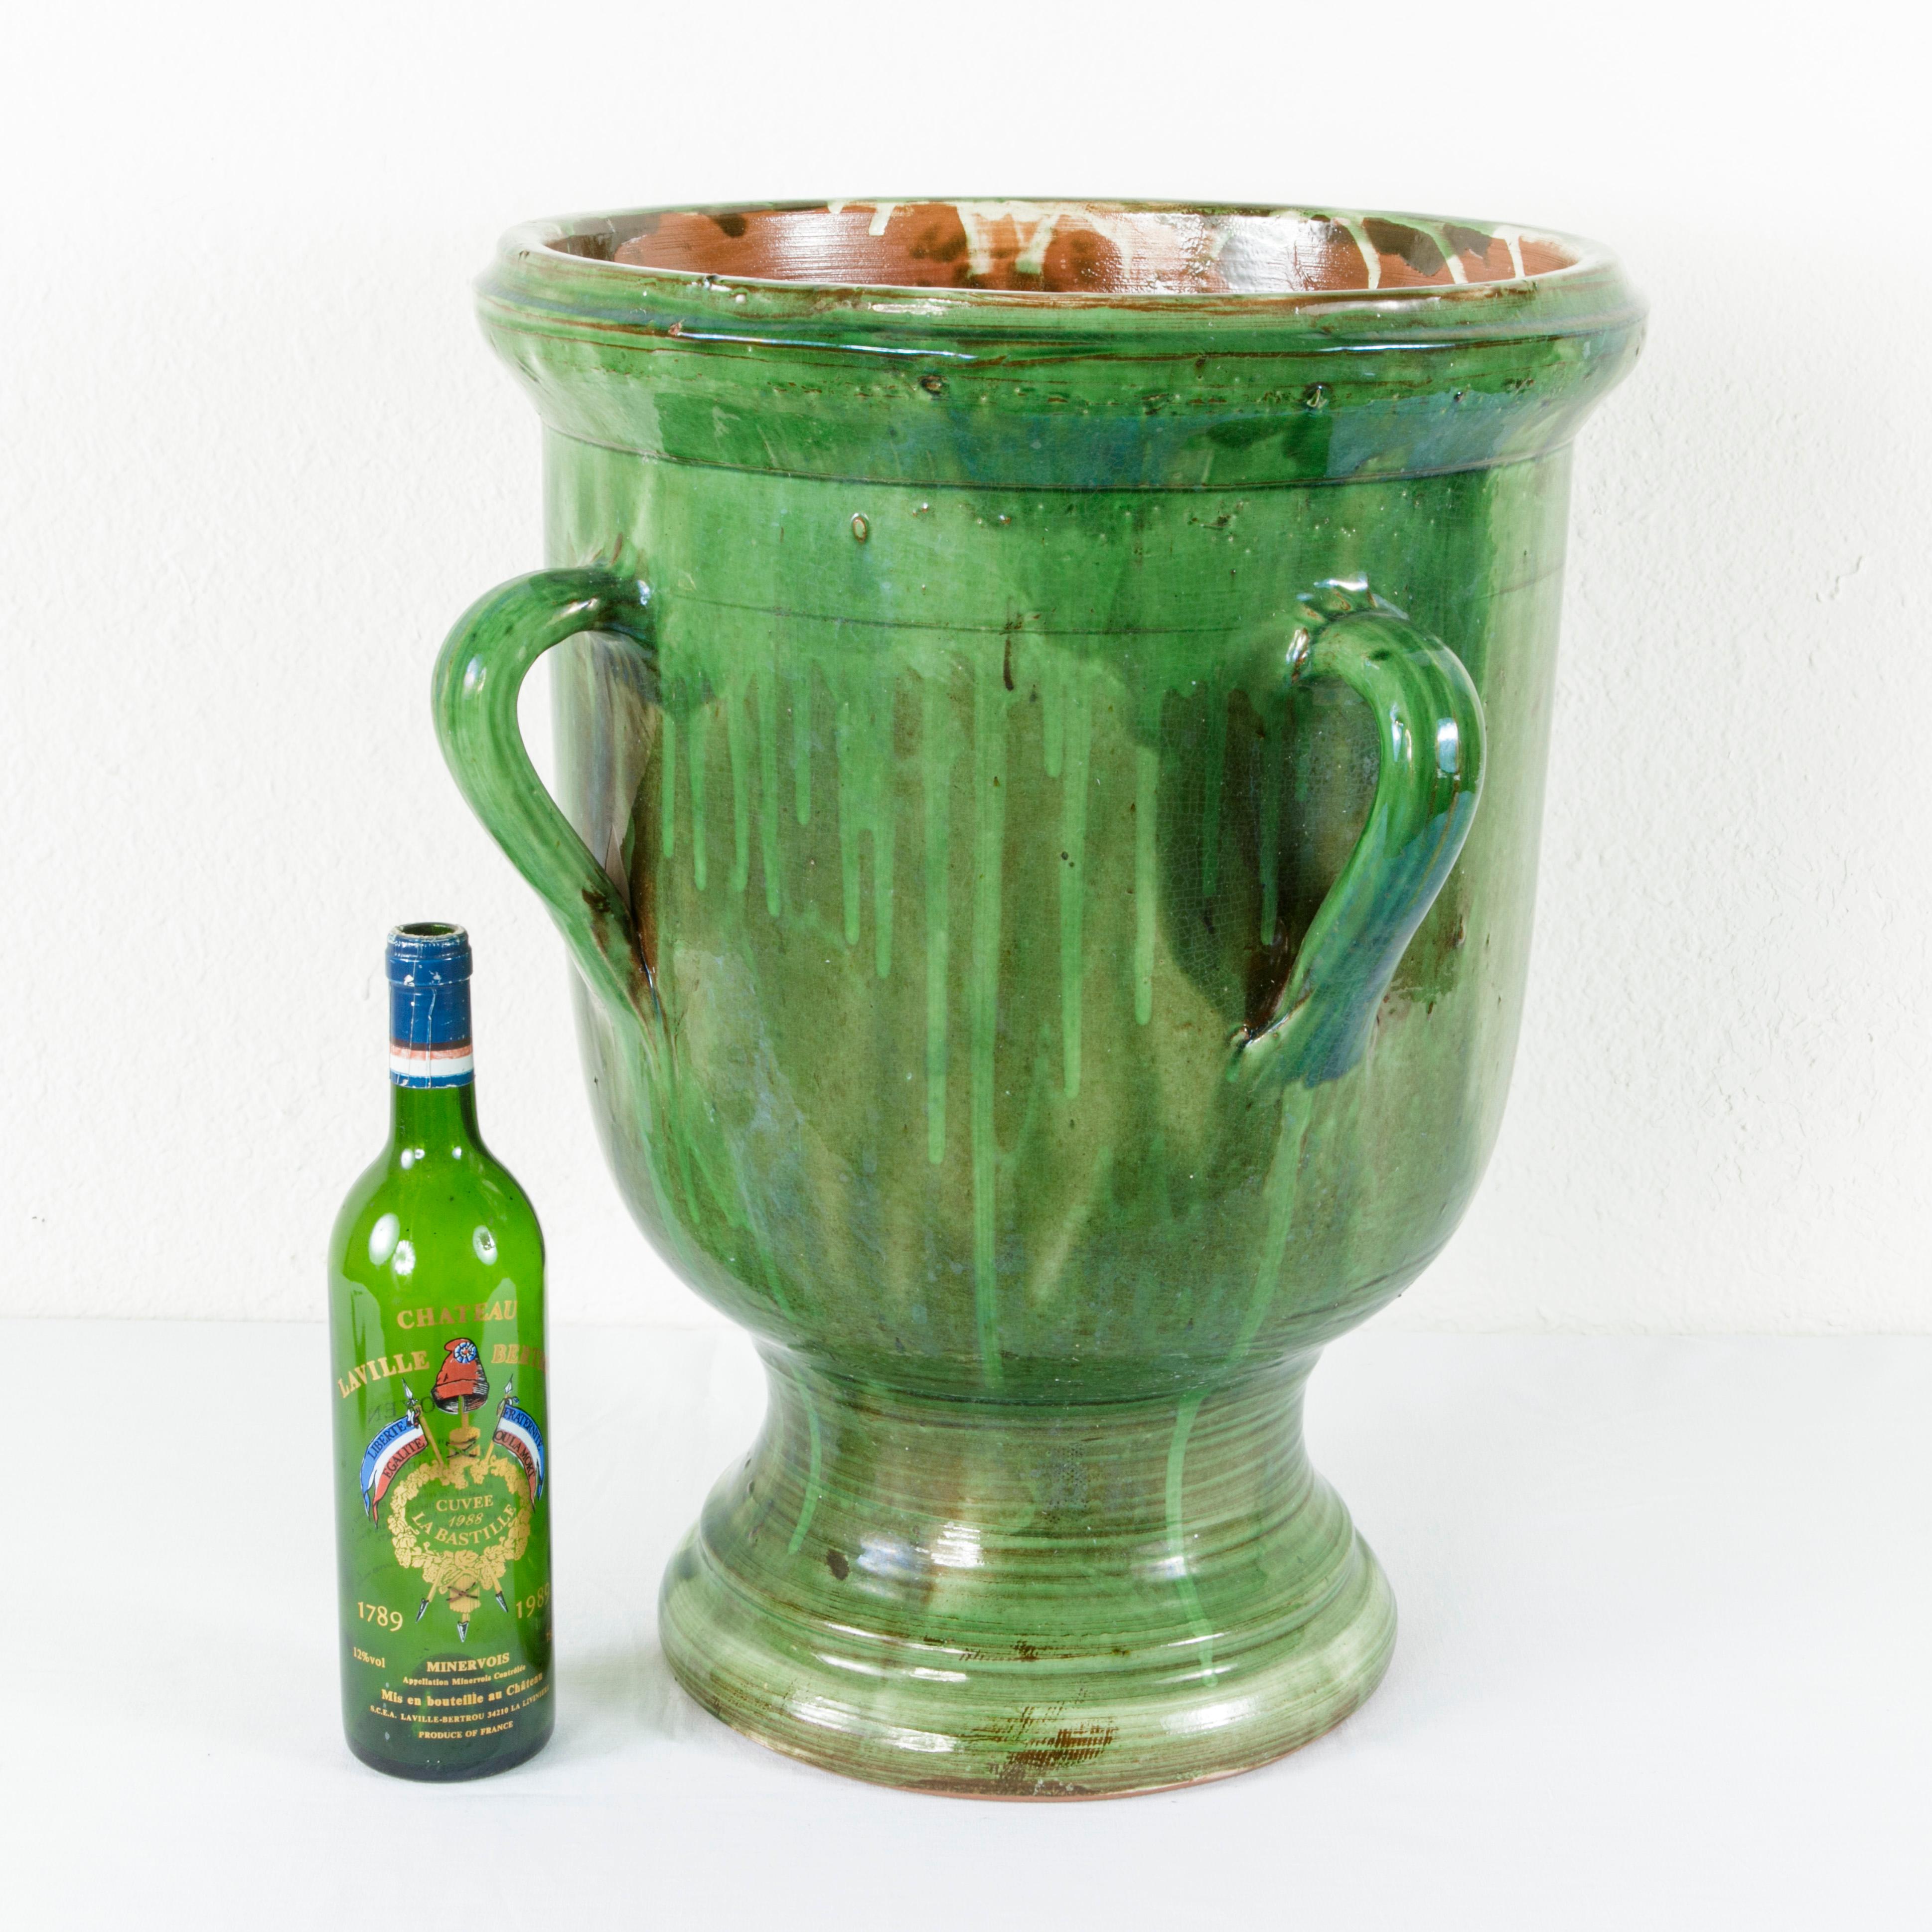 From the region of Provence in Southern France, this early 20th century faience urn stands at an impressive 20.75 inches in height. The urn is glazed in a Classic green and features four handles. A beautiful planter or cachepot, circa 1910.